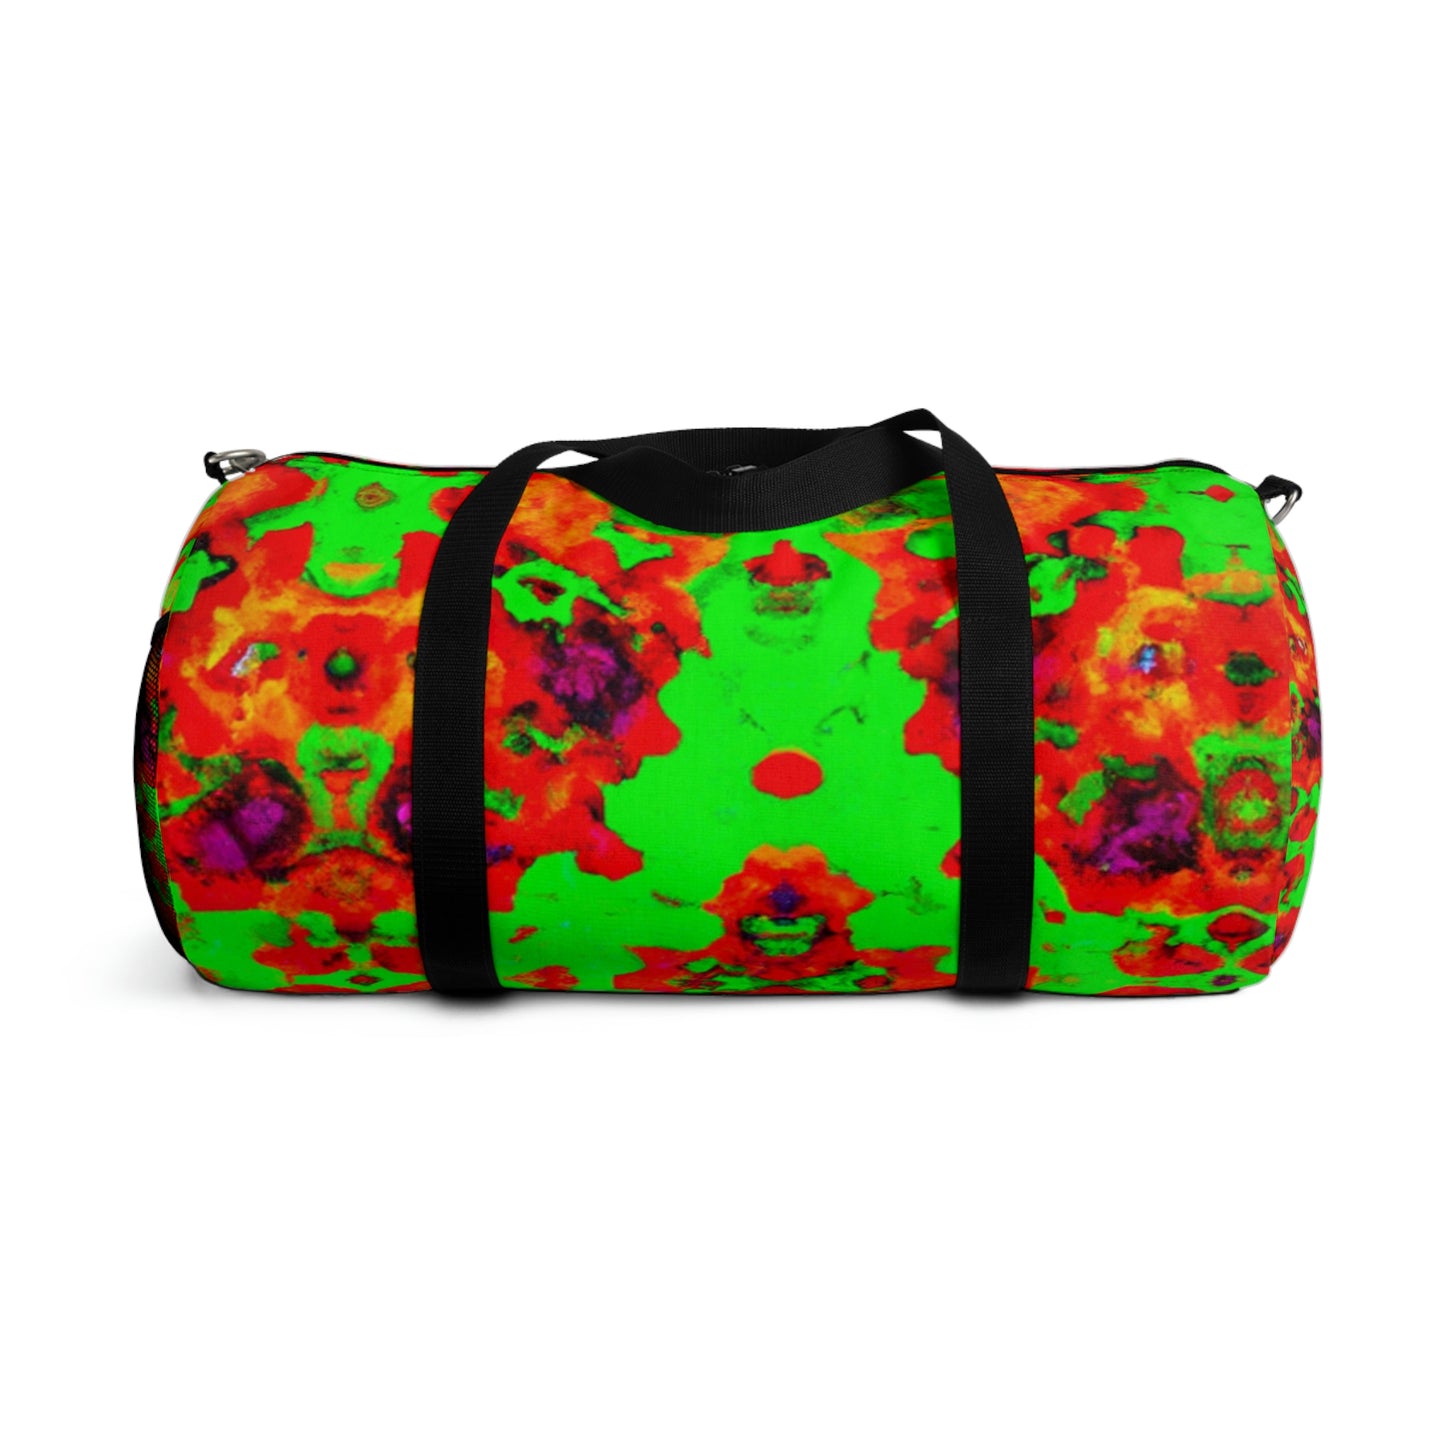 DeLuxe Avery - Psychedelic Duffel Bag